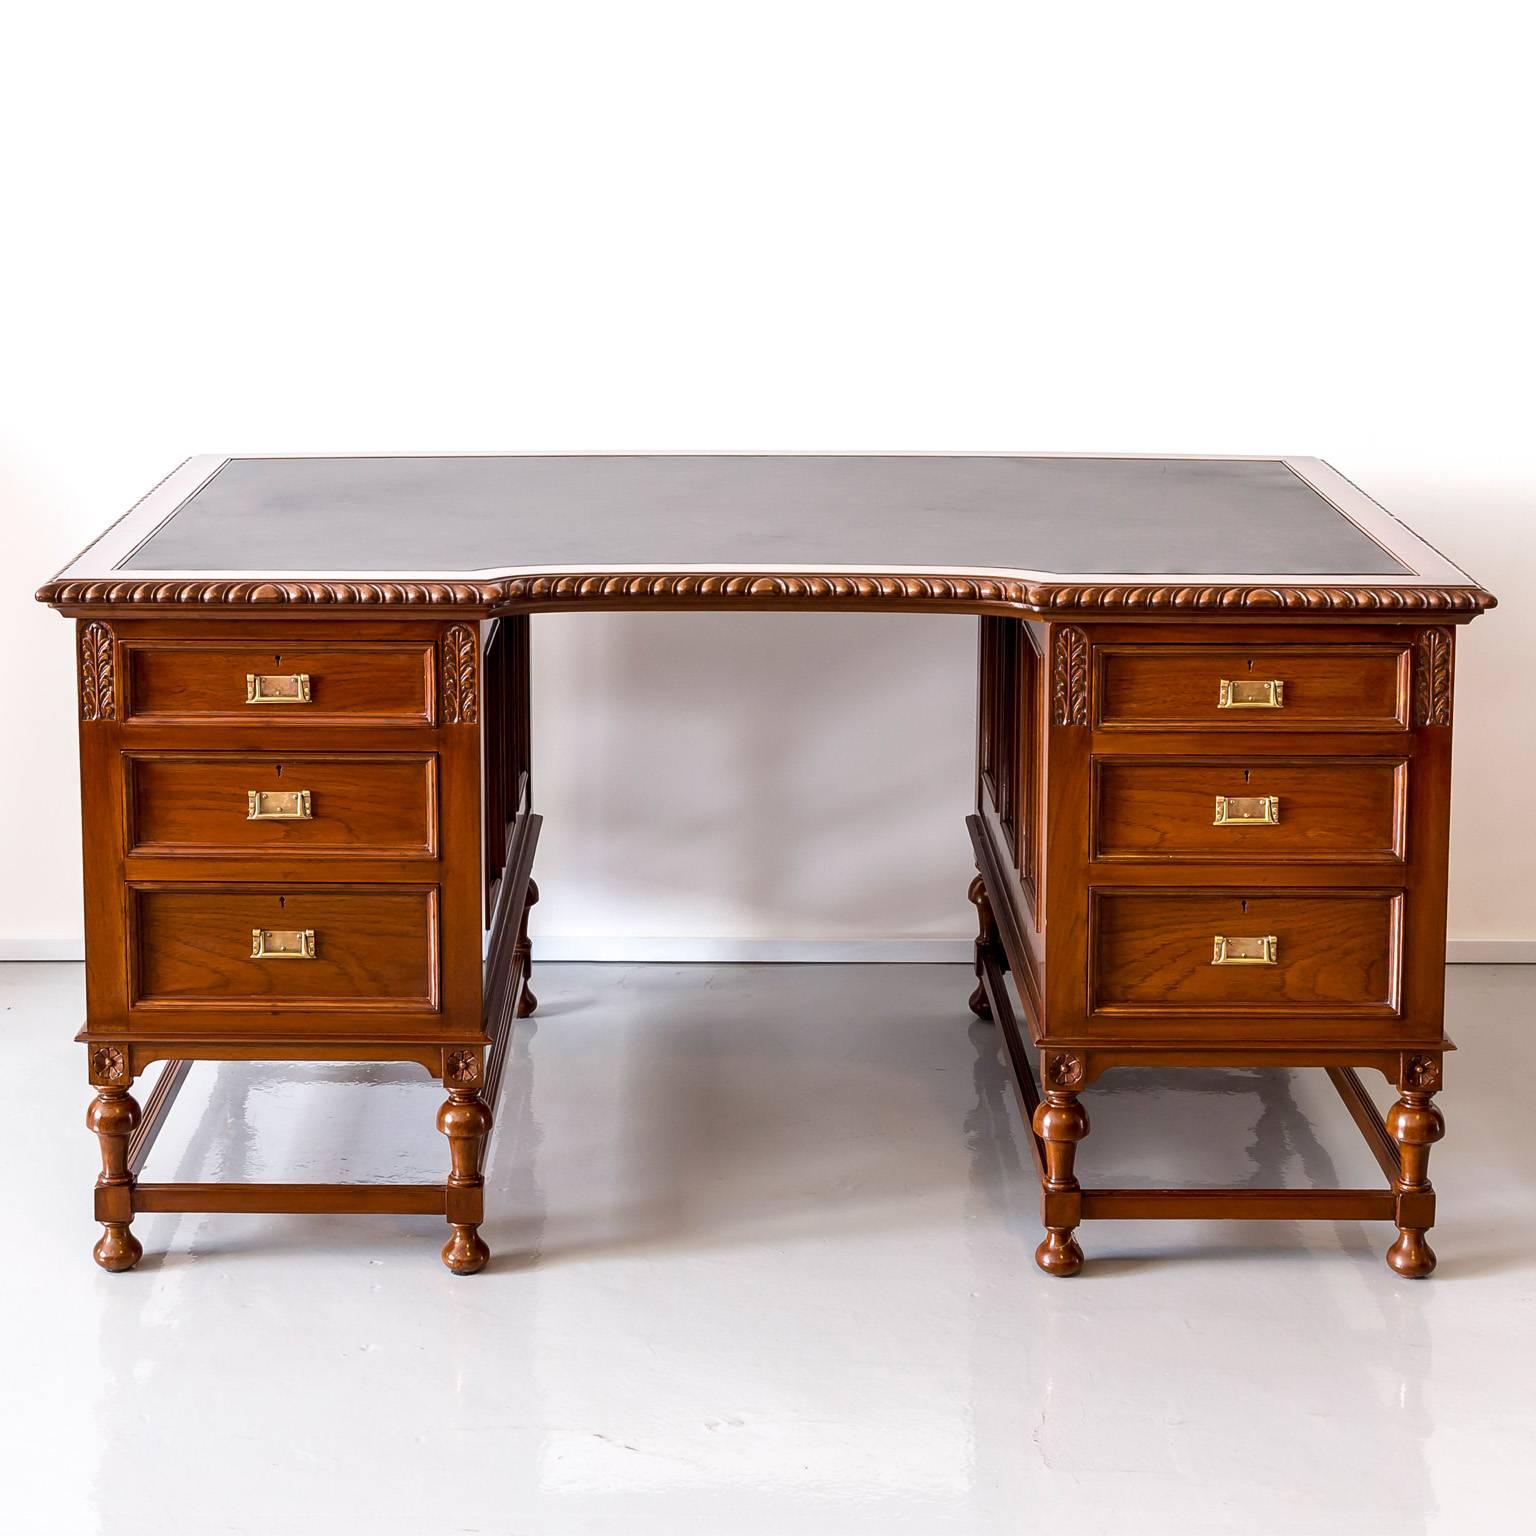 An elegant British Colonial pedestal desk in teak wood with a new inset black leather surface within an overhanging top panel. The top features an inverted centre section that is flanked by two pedestals. Each pedestal has three graduated drawers,